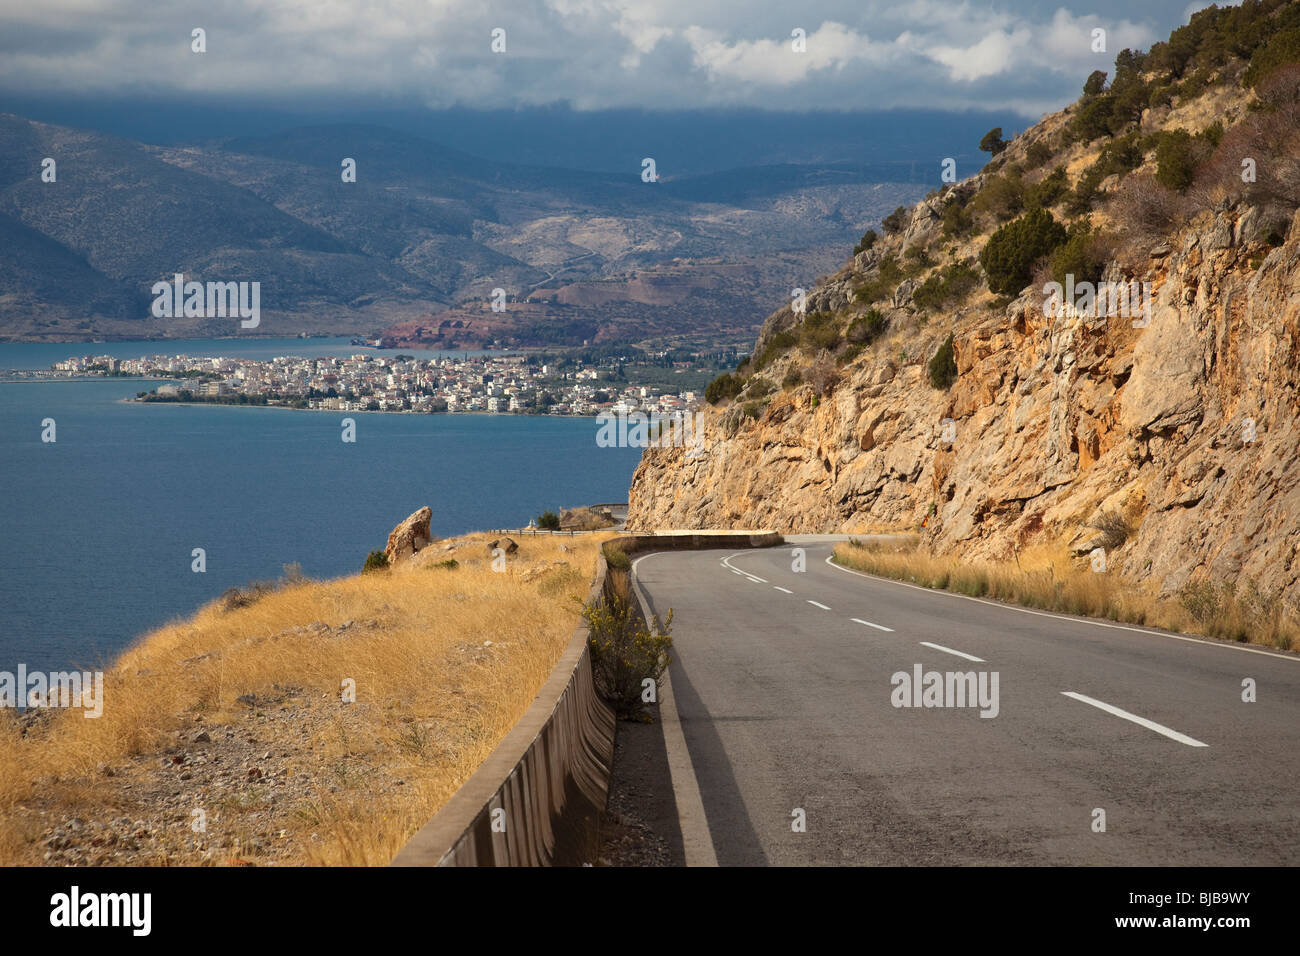 Road to Itea on Bay of Itea in Greece. Stock Photo